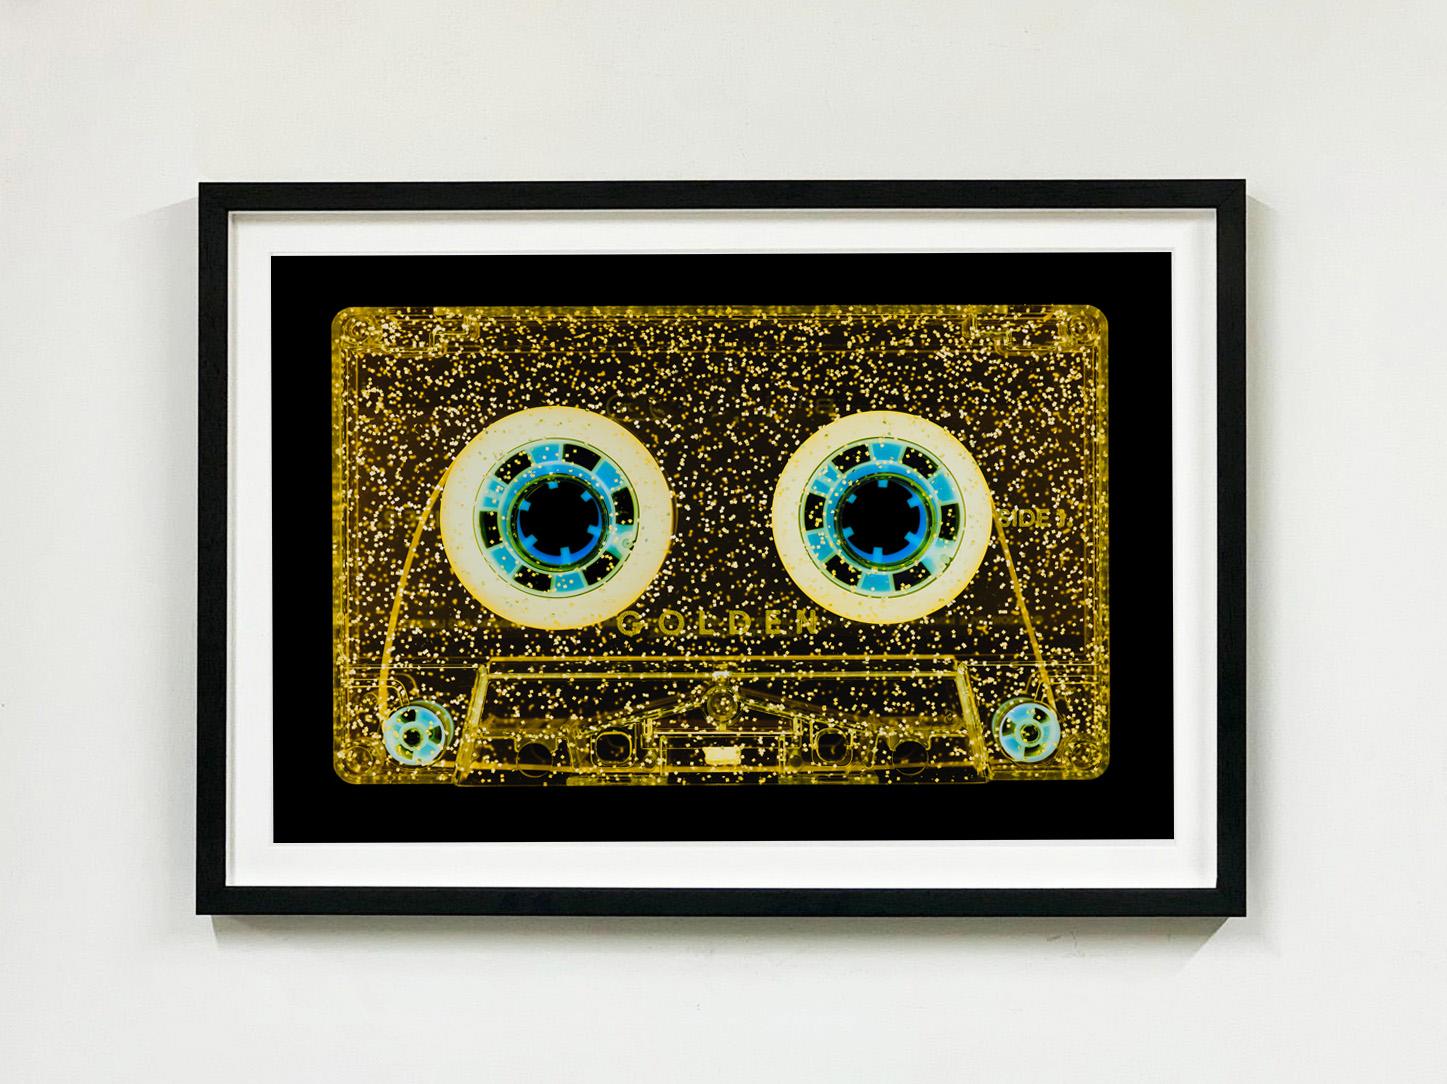 Tape Collection, All That Glitters is Golden - Pop Art Photography - Print by Heidler & Heeps